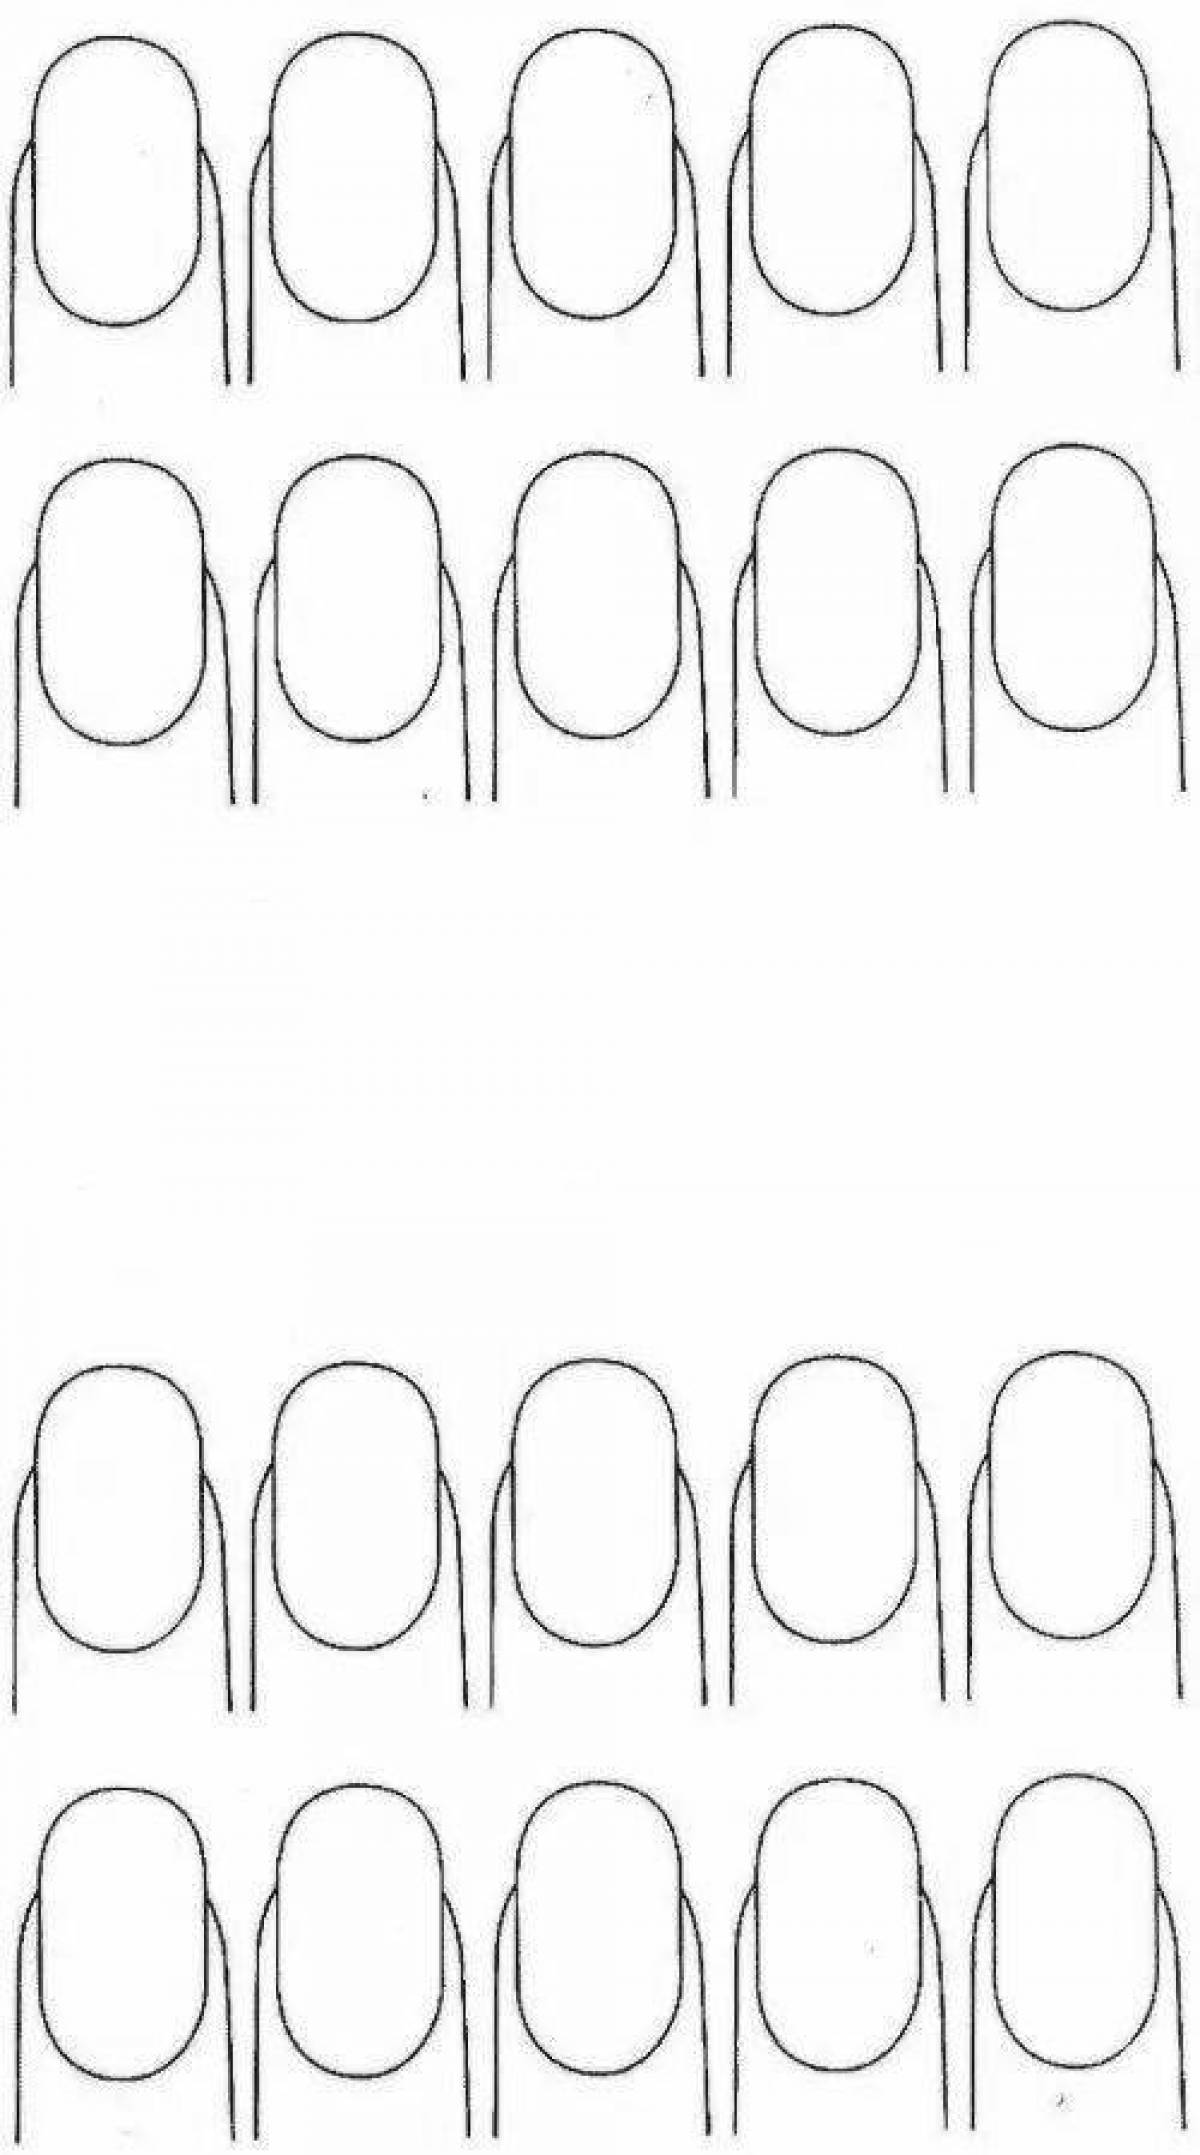 Coloring page for nails with bright pattern